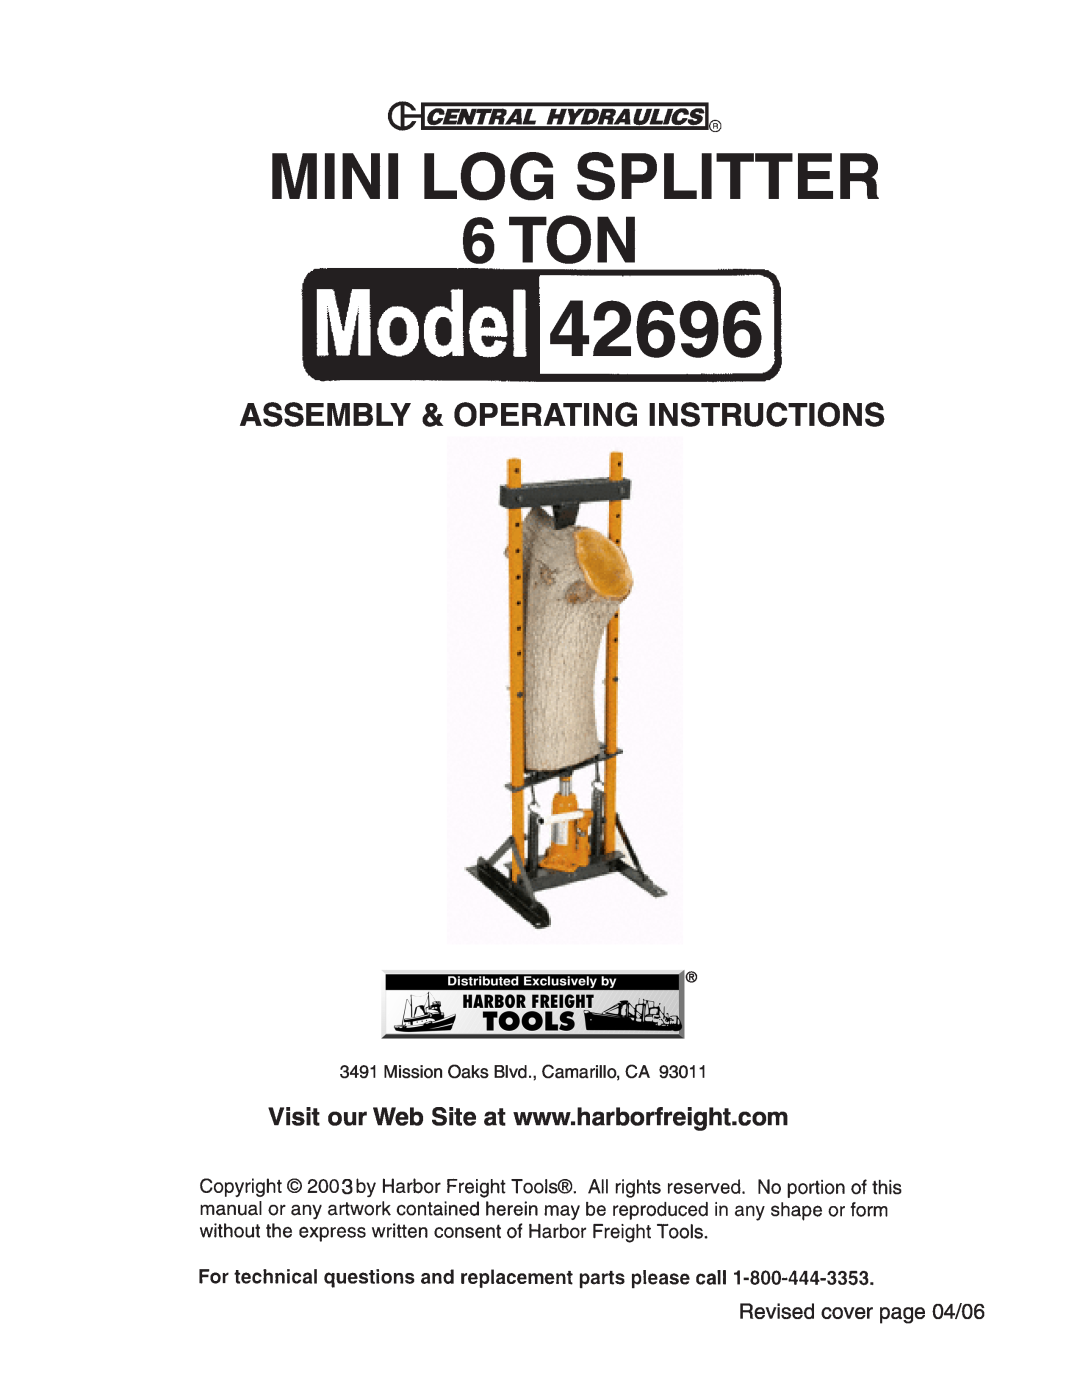 Harbor Freight Tools 42696 manual MINI LOG SPLITTER 6 TON, Assembly & Operating Instructions, Revised cover page 04/06 